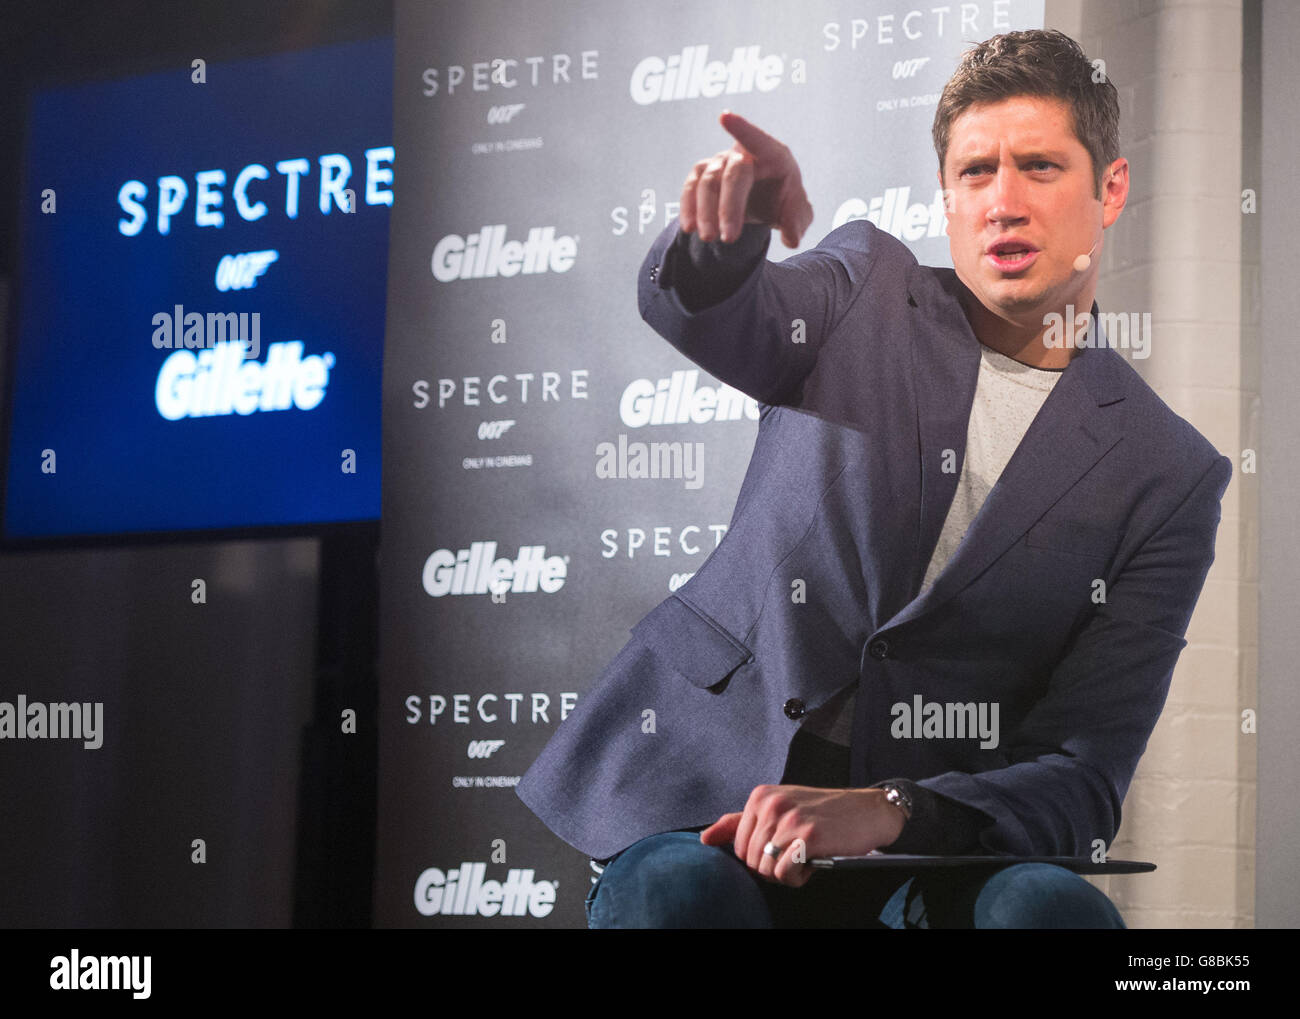 Vernon Kay during the Gillette Bond Moments launch event in London to celebrate the partnership between the brand and SPECTRE, the 24th Bond film. Stock Photo